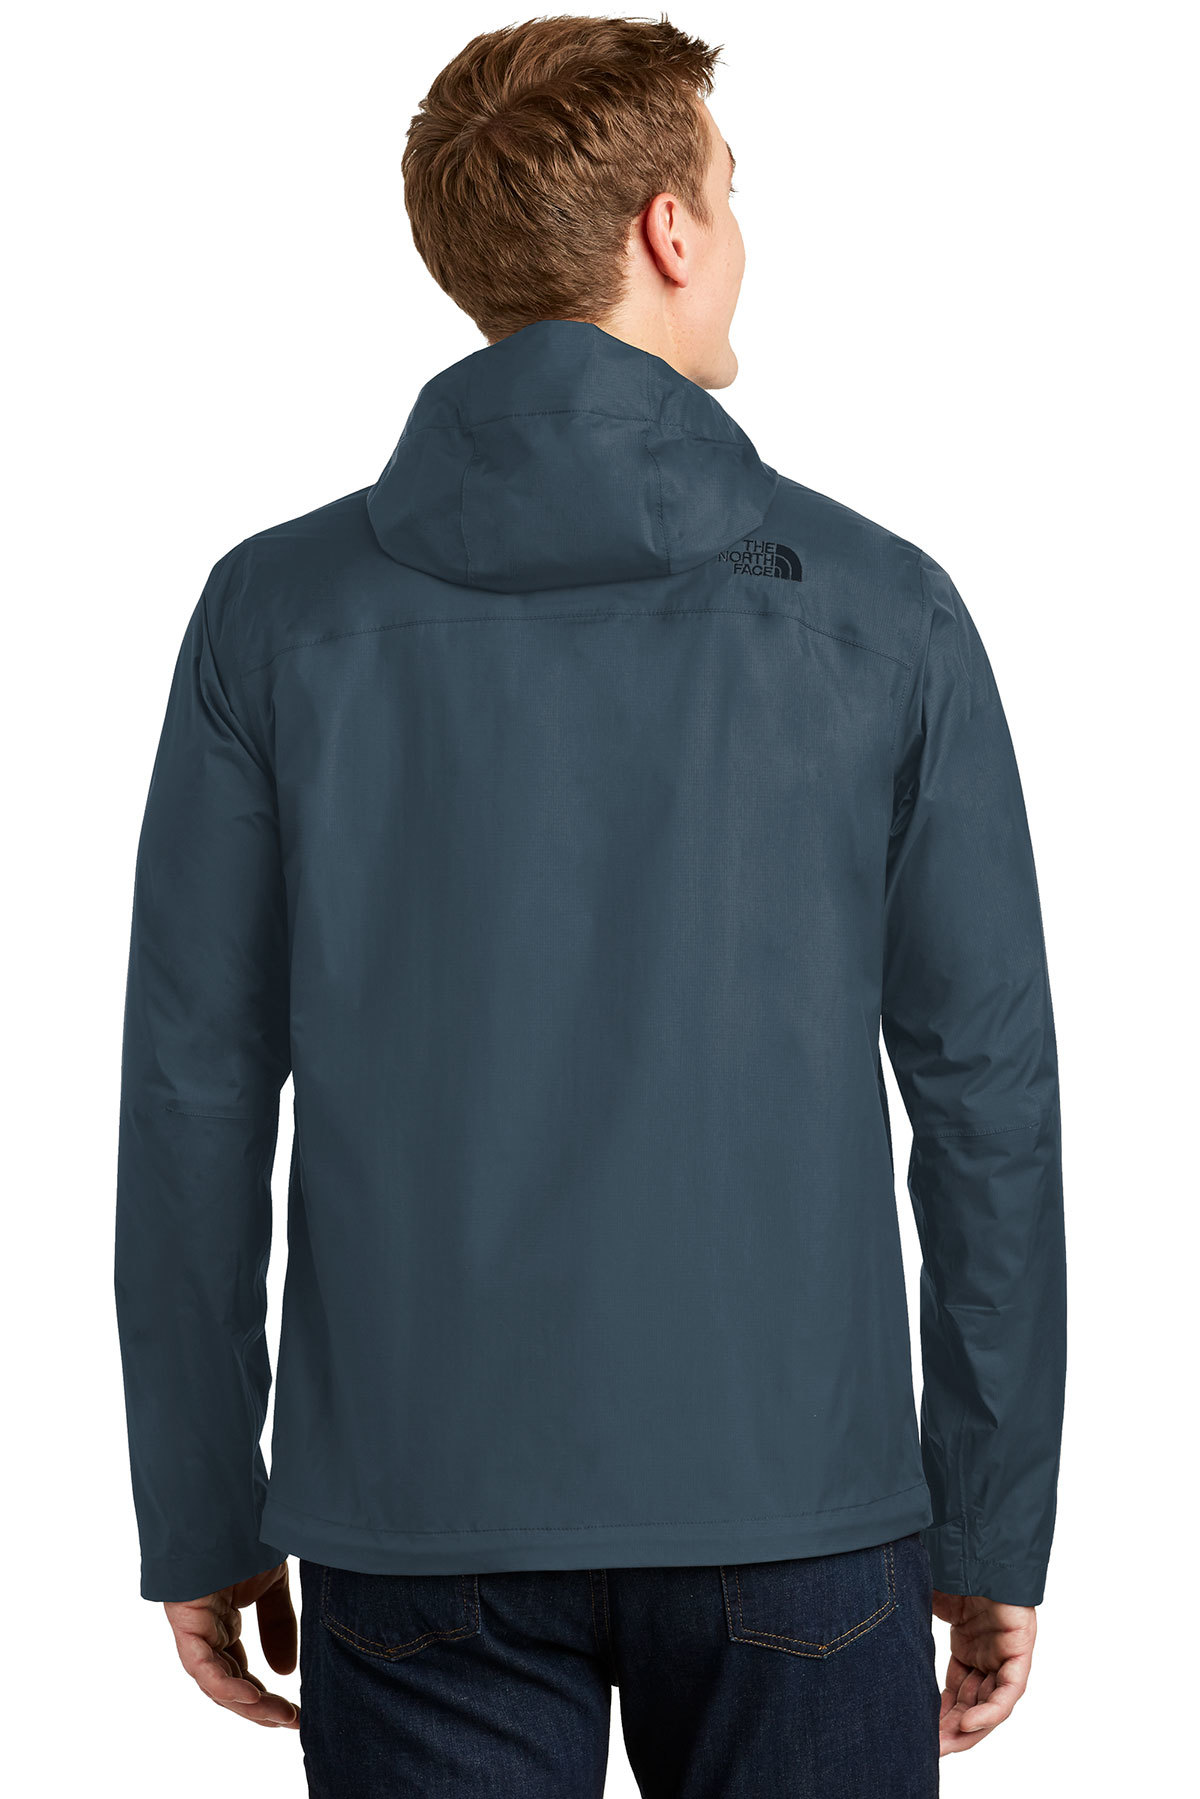 The North Face ® DryVent™ Rain Jacket | Product | SanMar